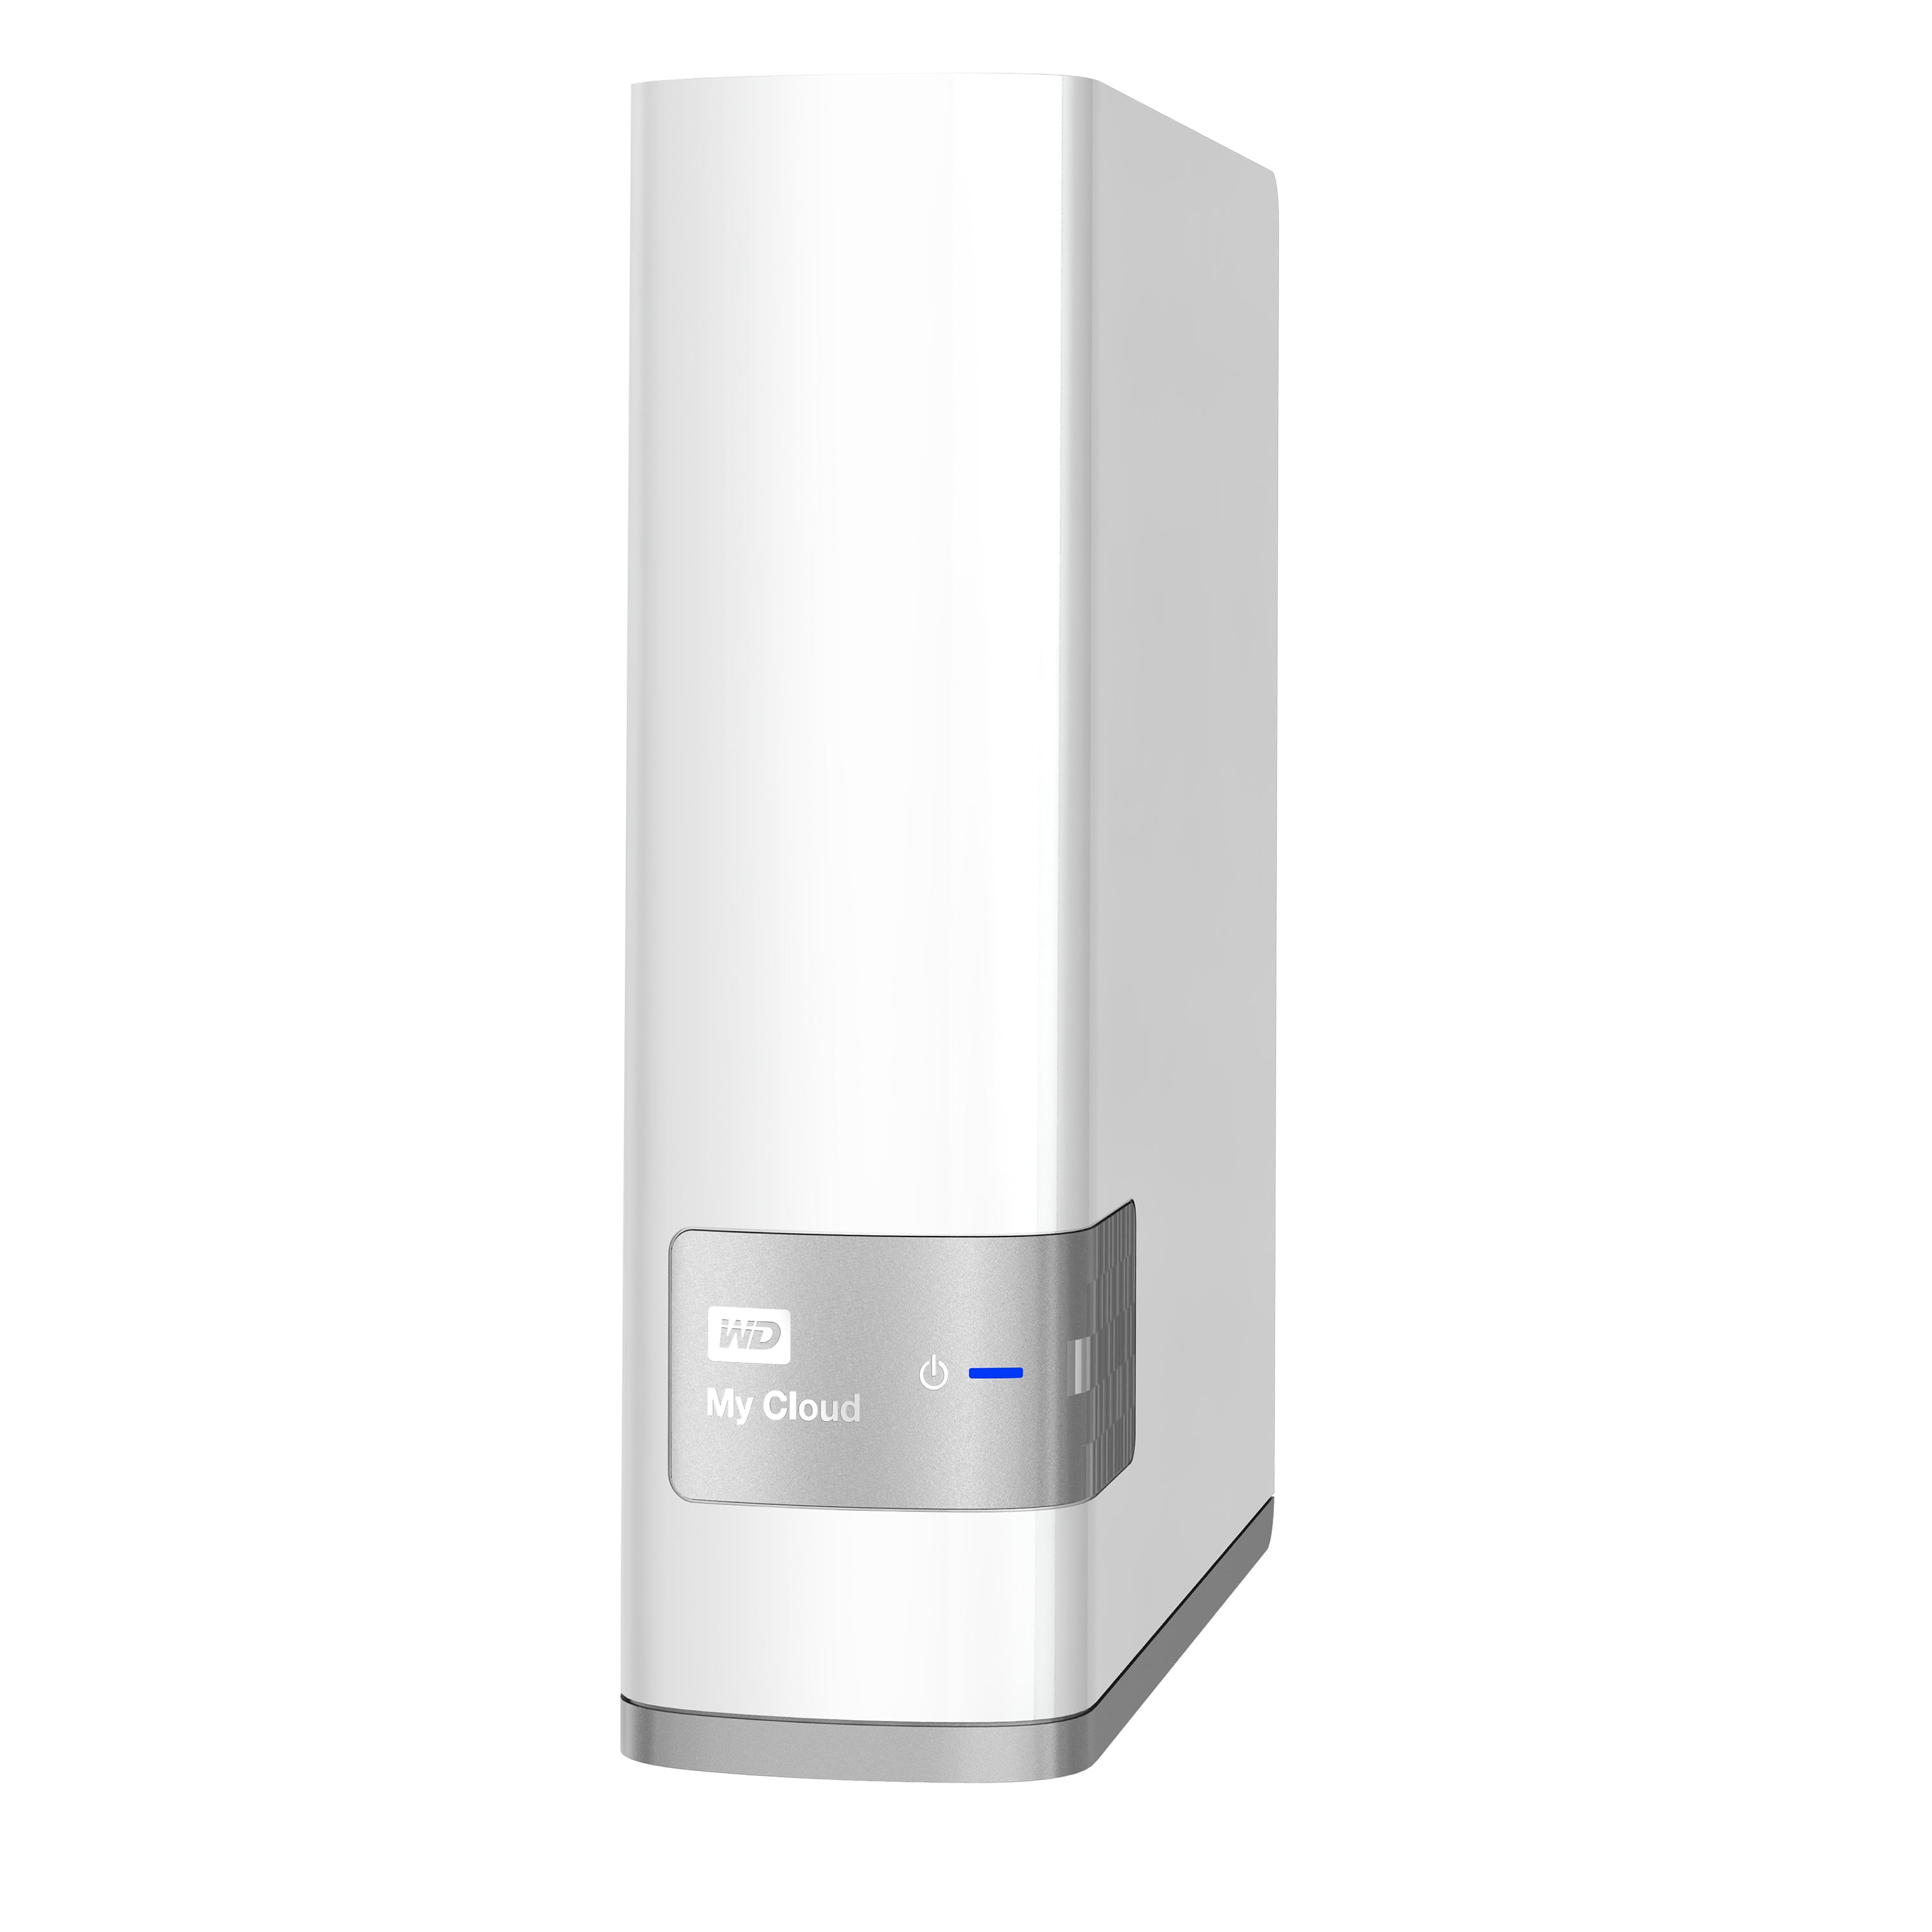  WD 2TB My Cloud Personal Network Attached Storage - NAS -  WDBCTL0020HWT-NESN,White : Electronics